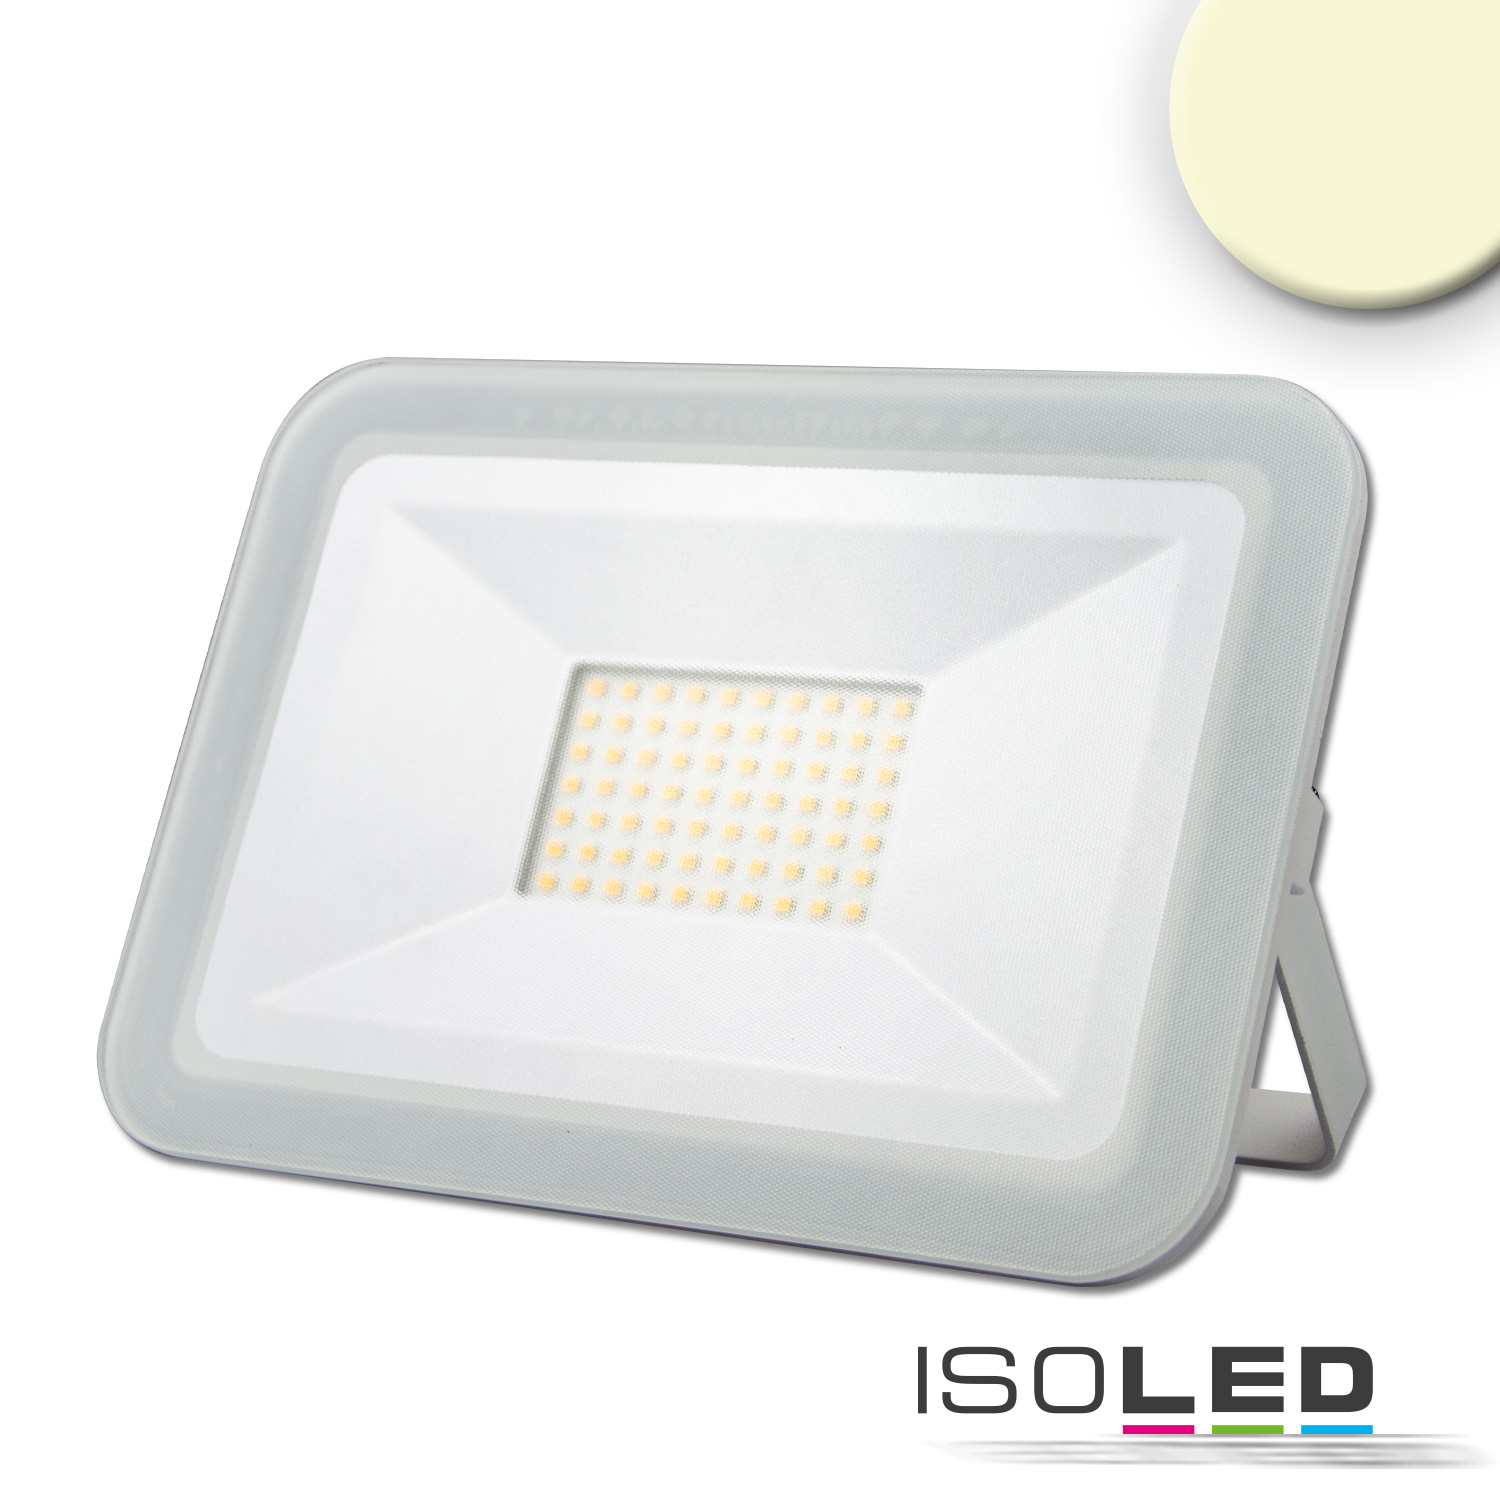 ISOLED 115110 LED Fluter Pad 50W, weiss, 3000K 100cm Kabel